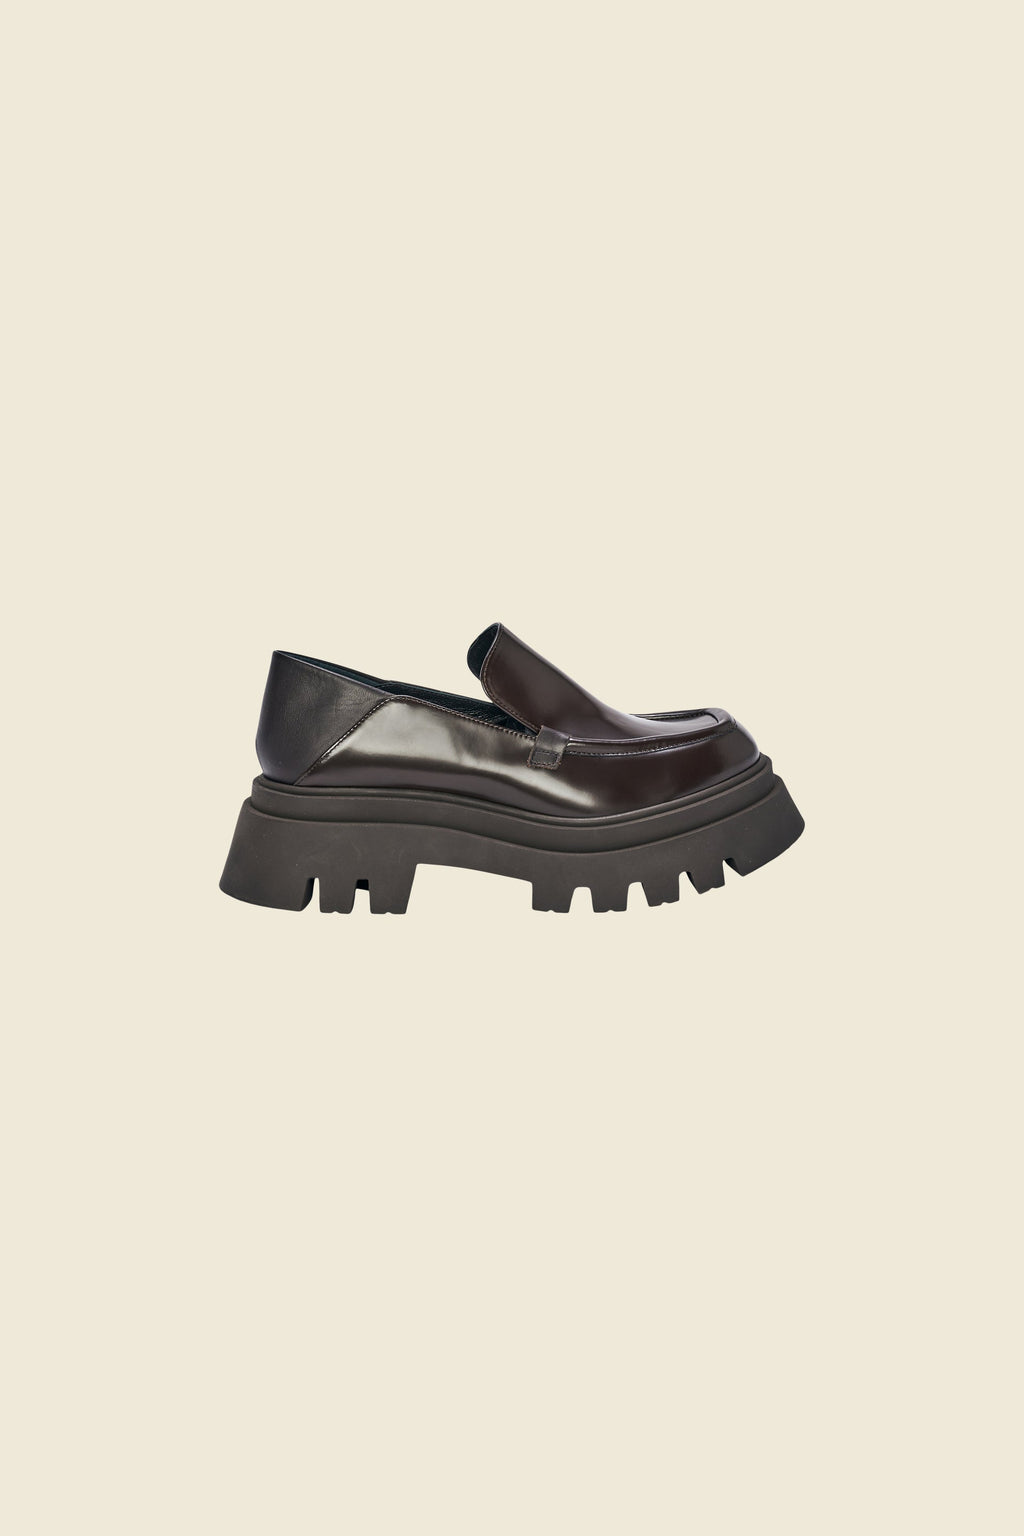 Dorothee Schumacher-OUTLET-SALE-GLOSSY AMBITION loafer--ARCHIVIST